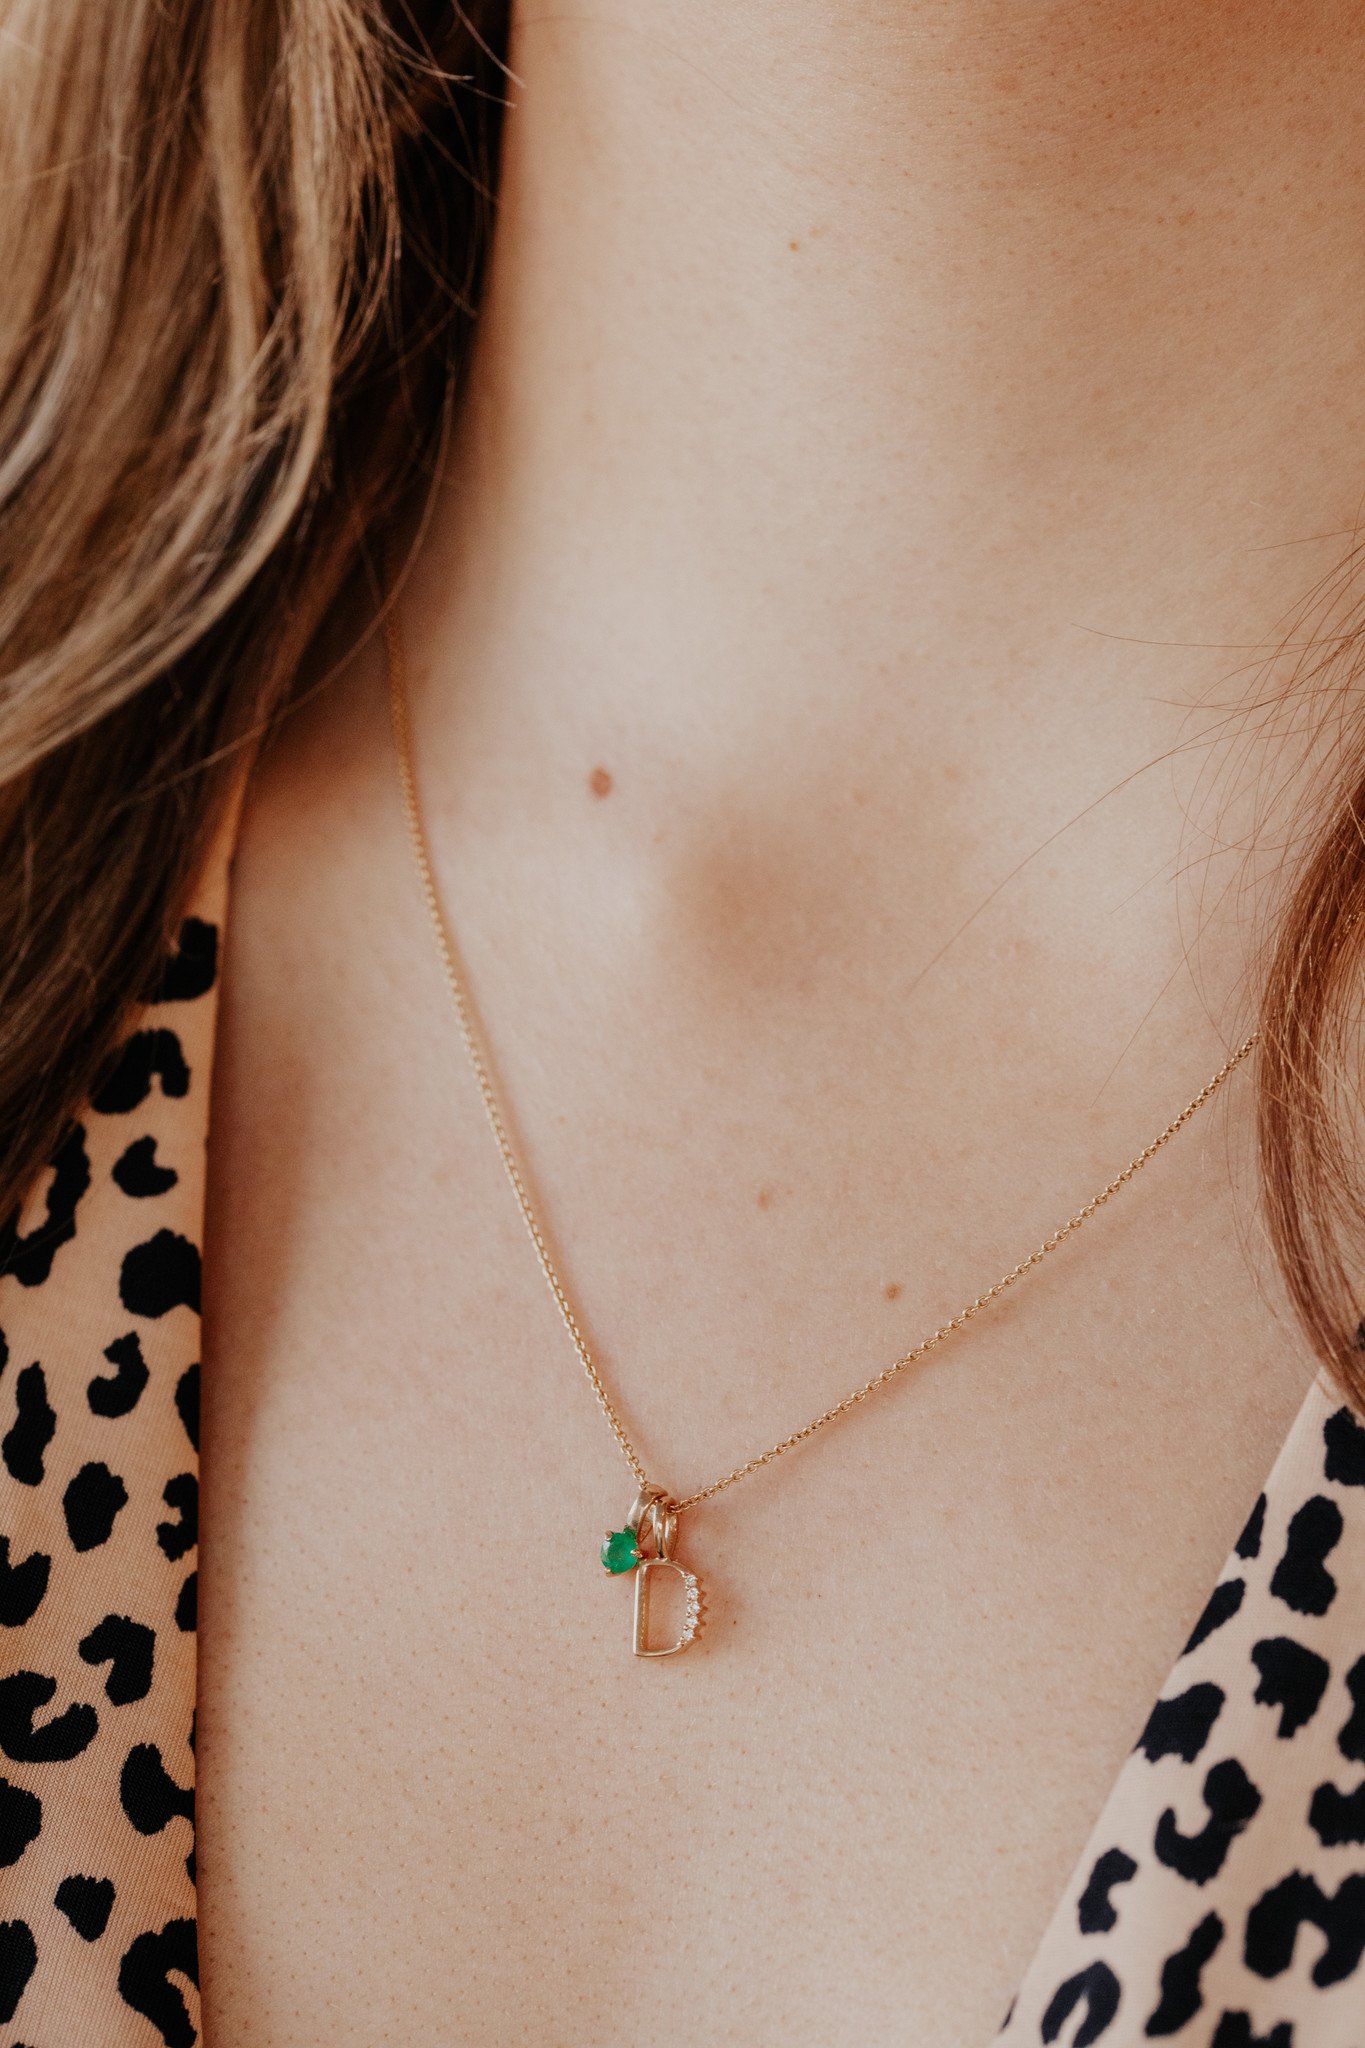 Candy Gemstone Necklace | The Candy Gemstone Collection | Alexis Russell